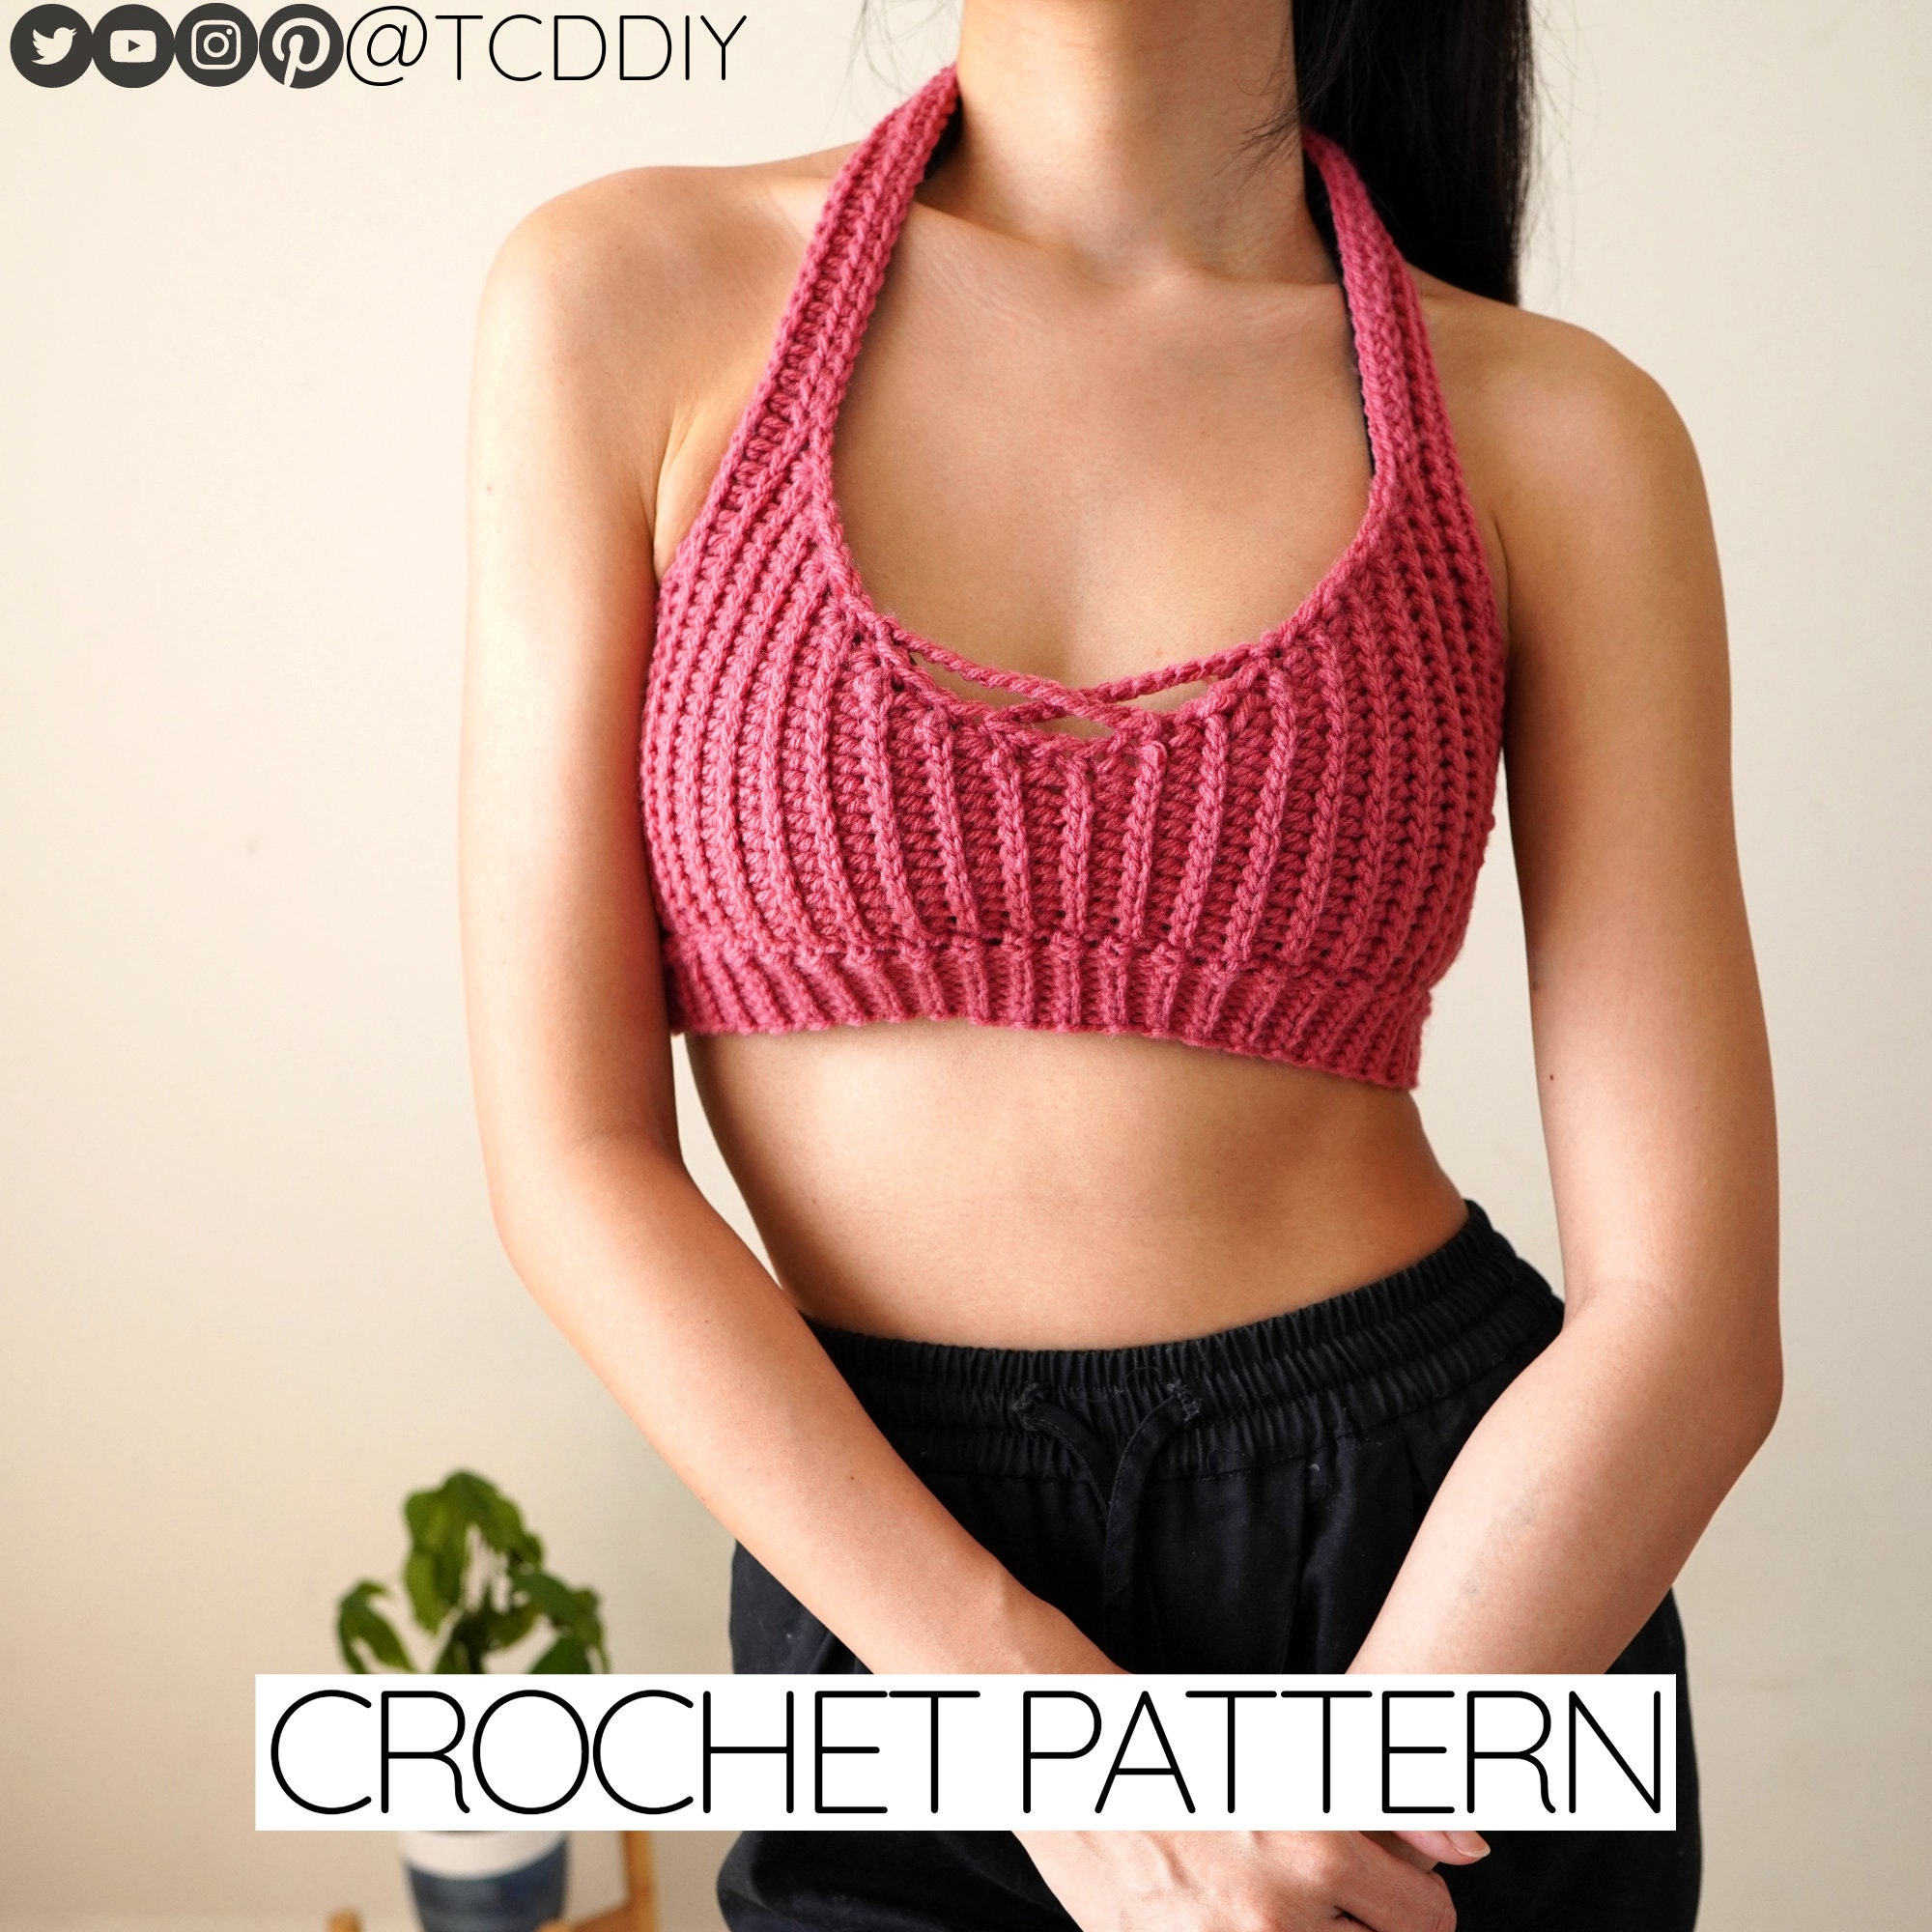 8 Crochet Bralette Patterns That Are Comfortable To Wear